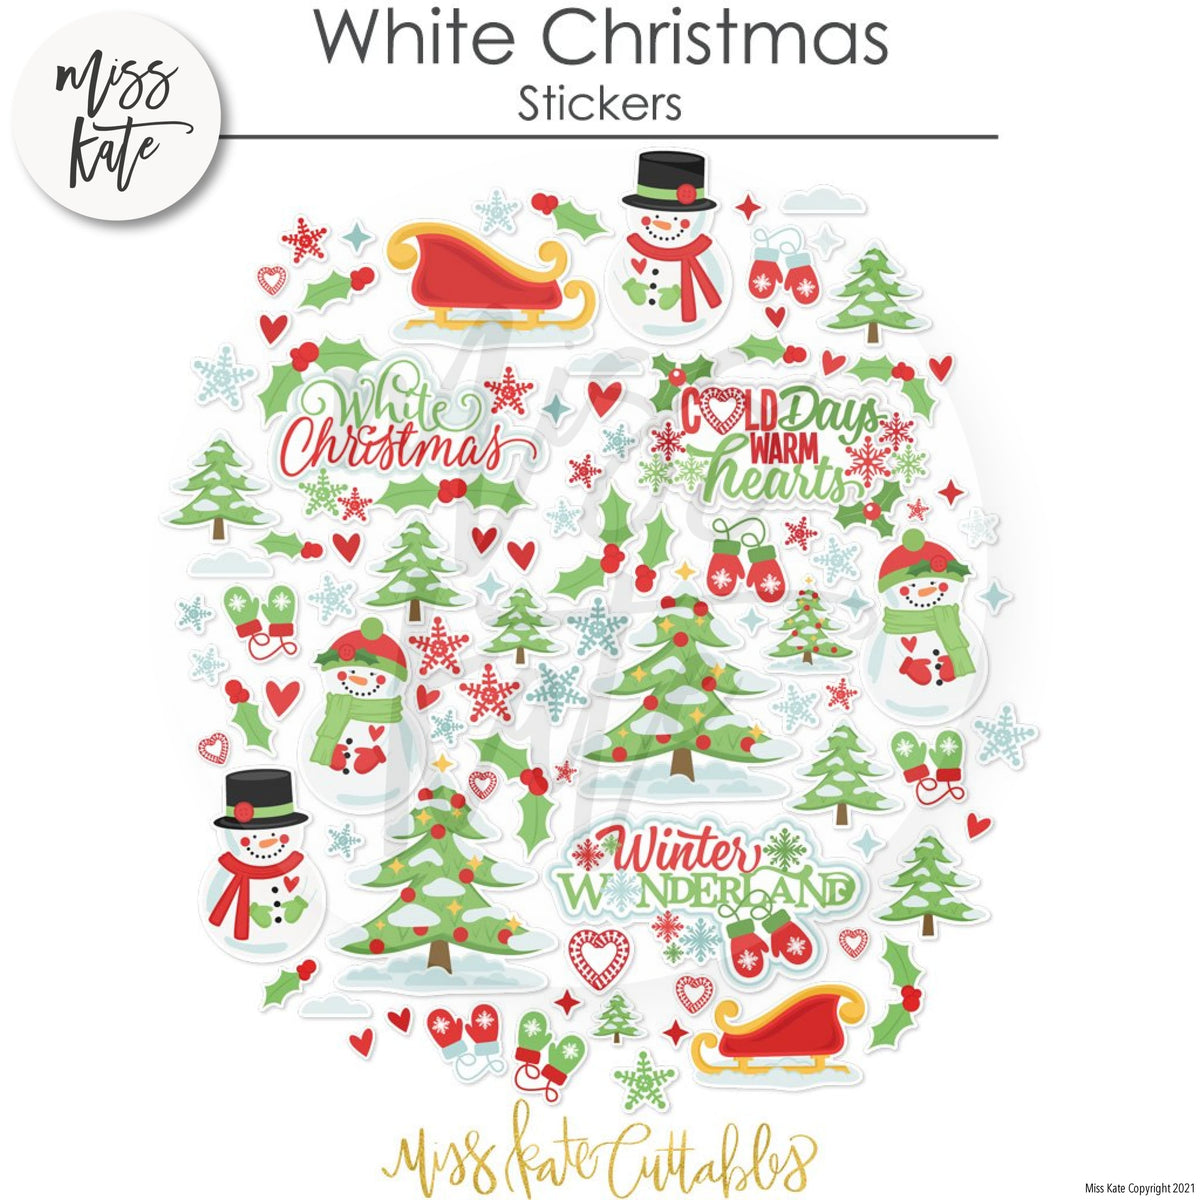 Christmas Eve - Sticker Sheet Stickers Christmas, planner – MISS KATE